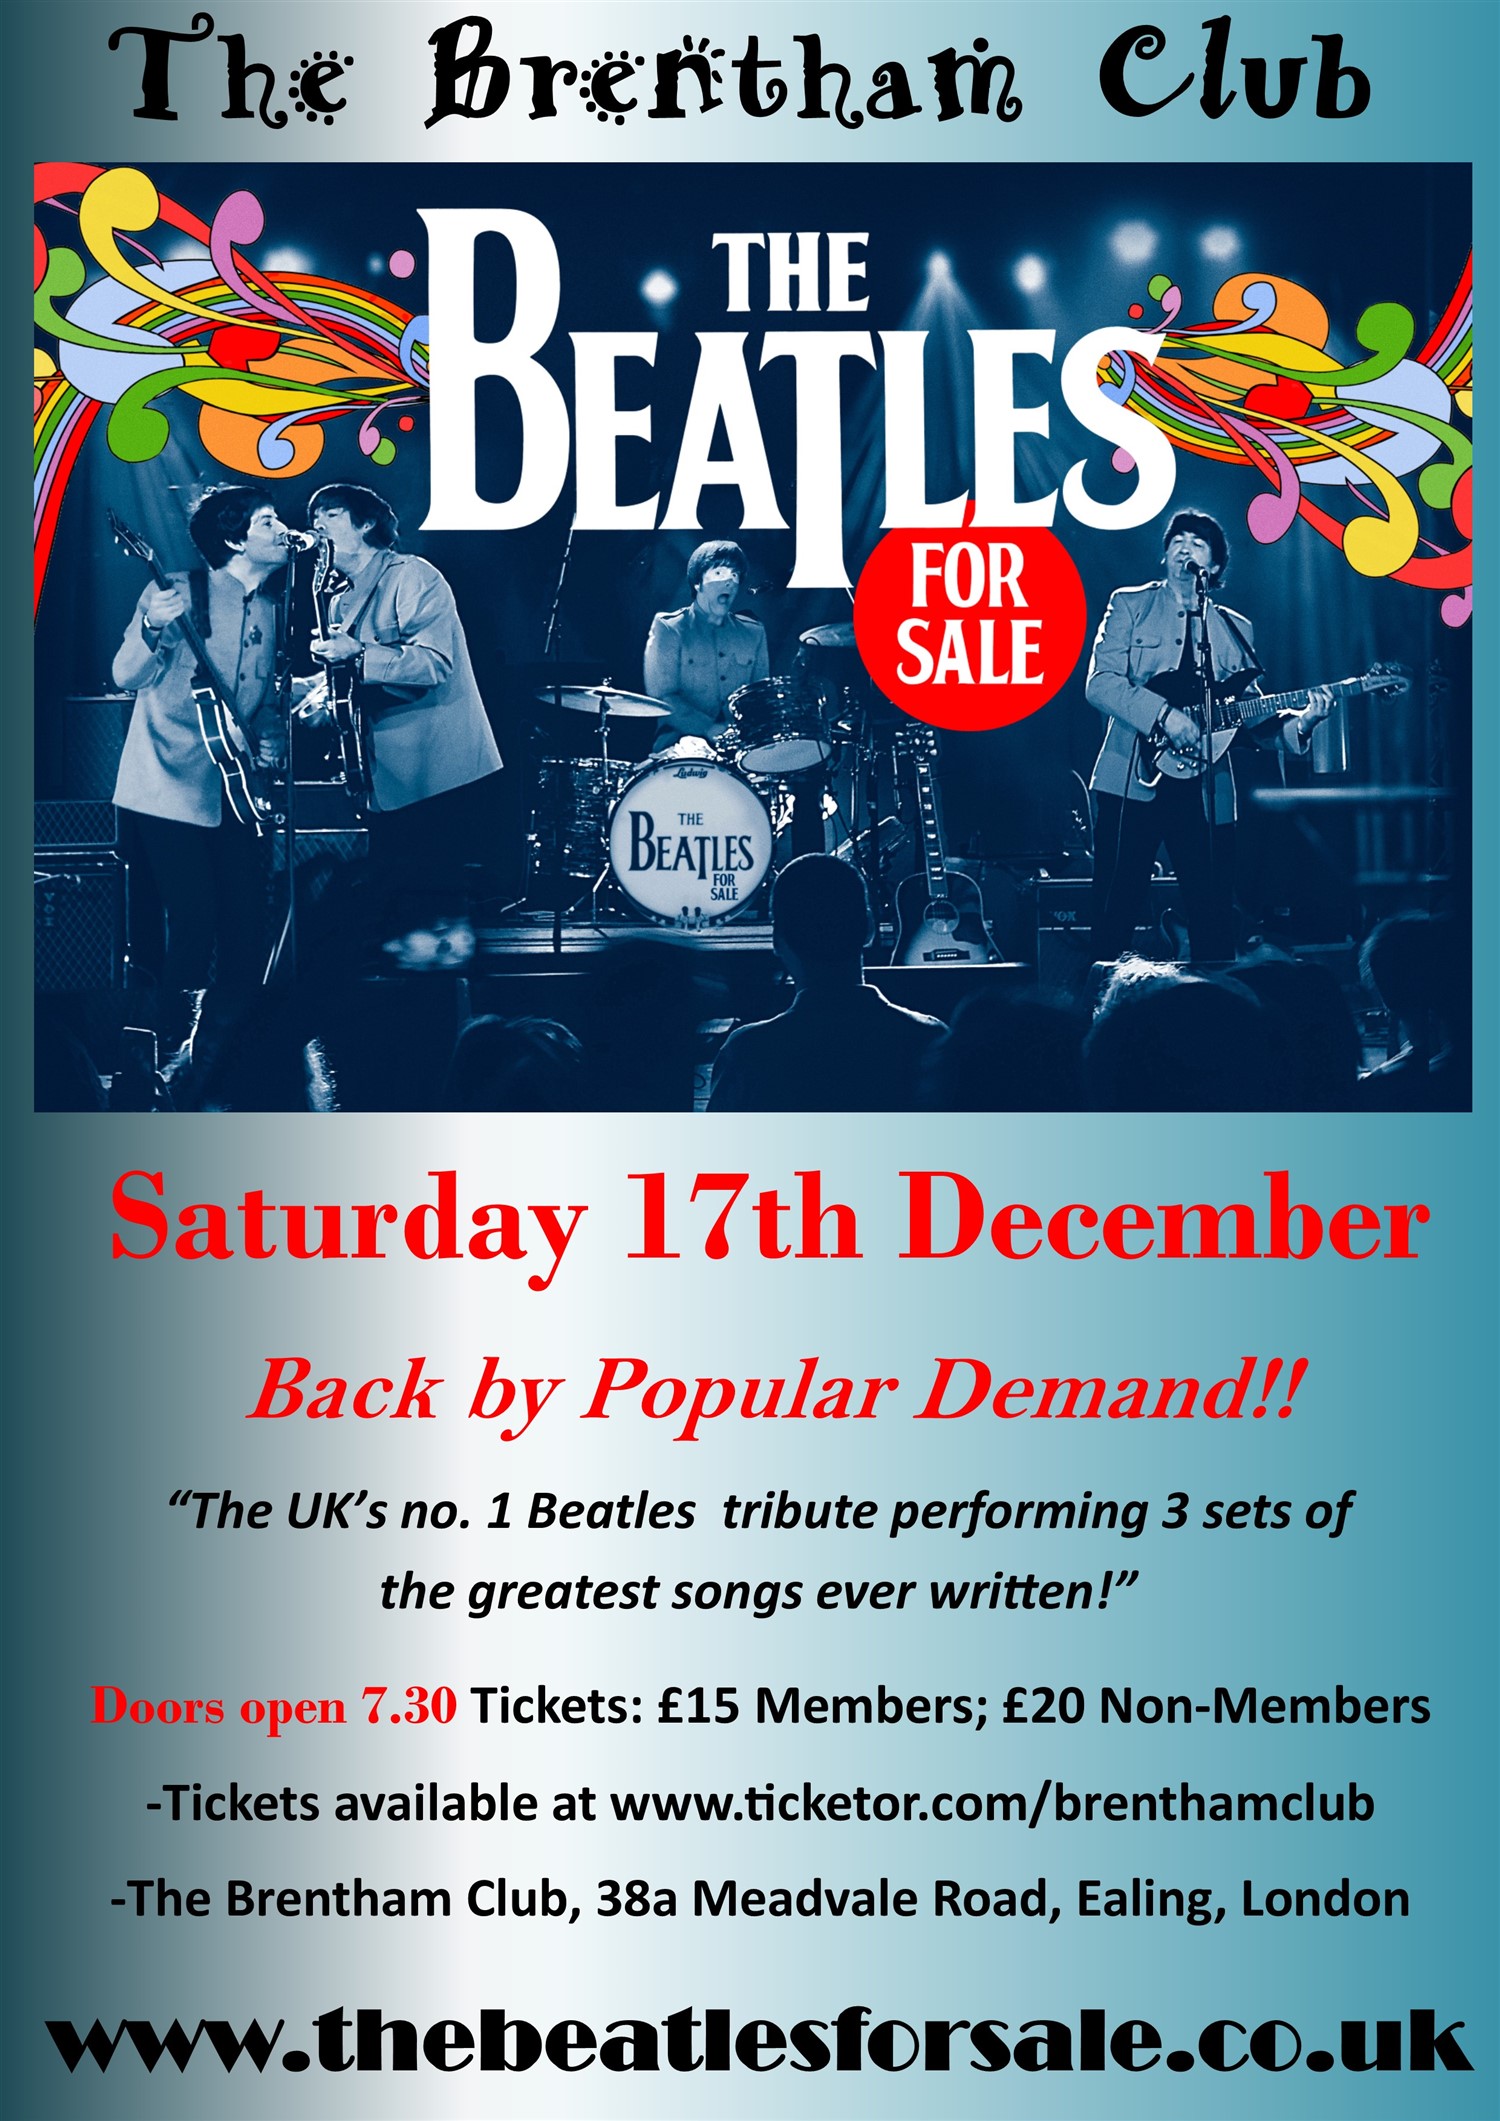 The Beatles for sale  on Dec 17, 19:30@The Brentham Club - Buy tickets and Get information on Brenthamclub.co.uk 